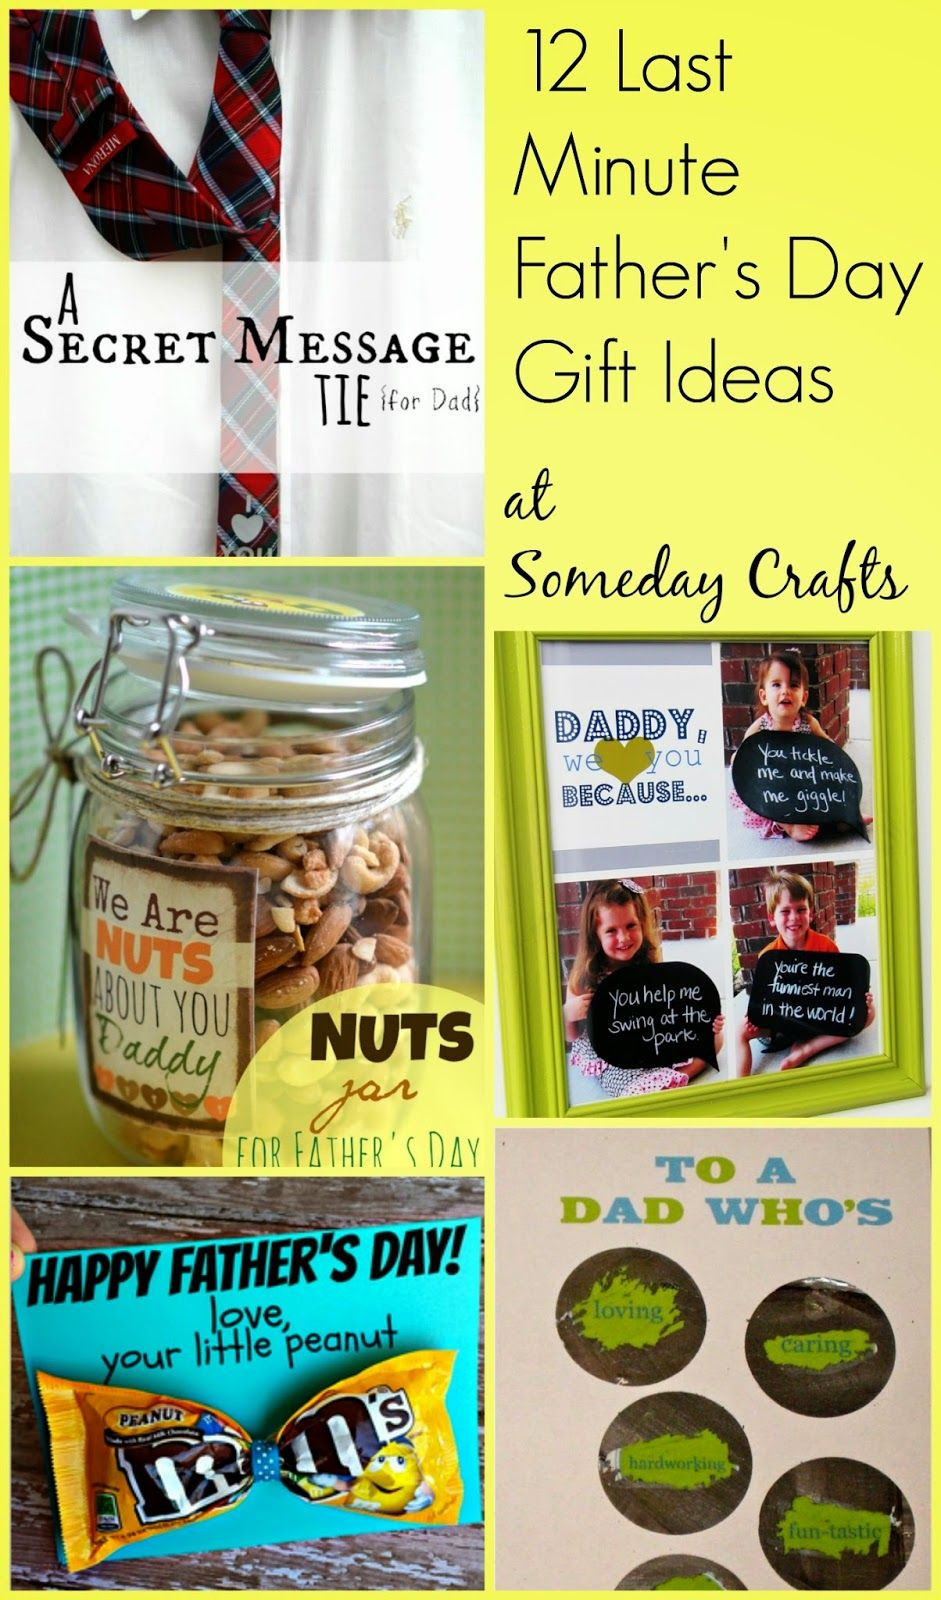 Last Minute Father'S Day Gift Ideas
 Someday Crafts 12 Last Minute Father s Day Gifts